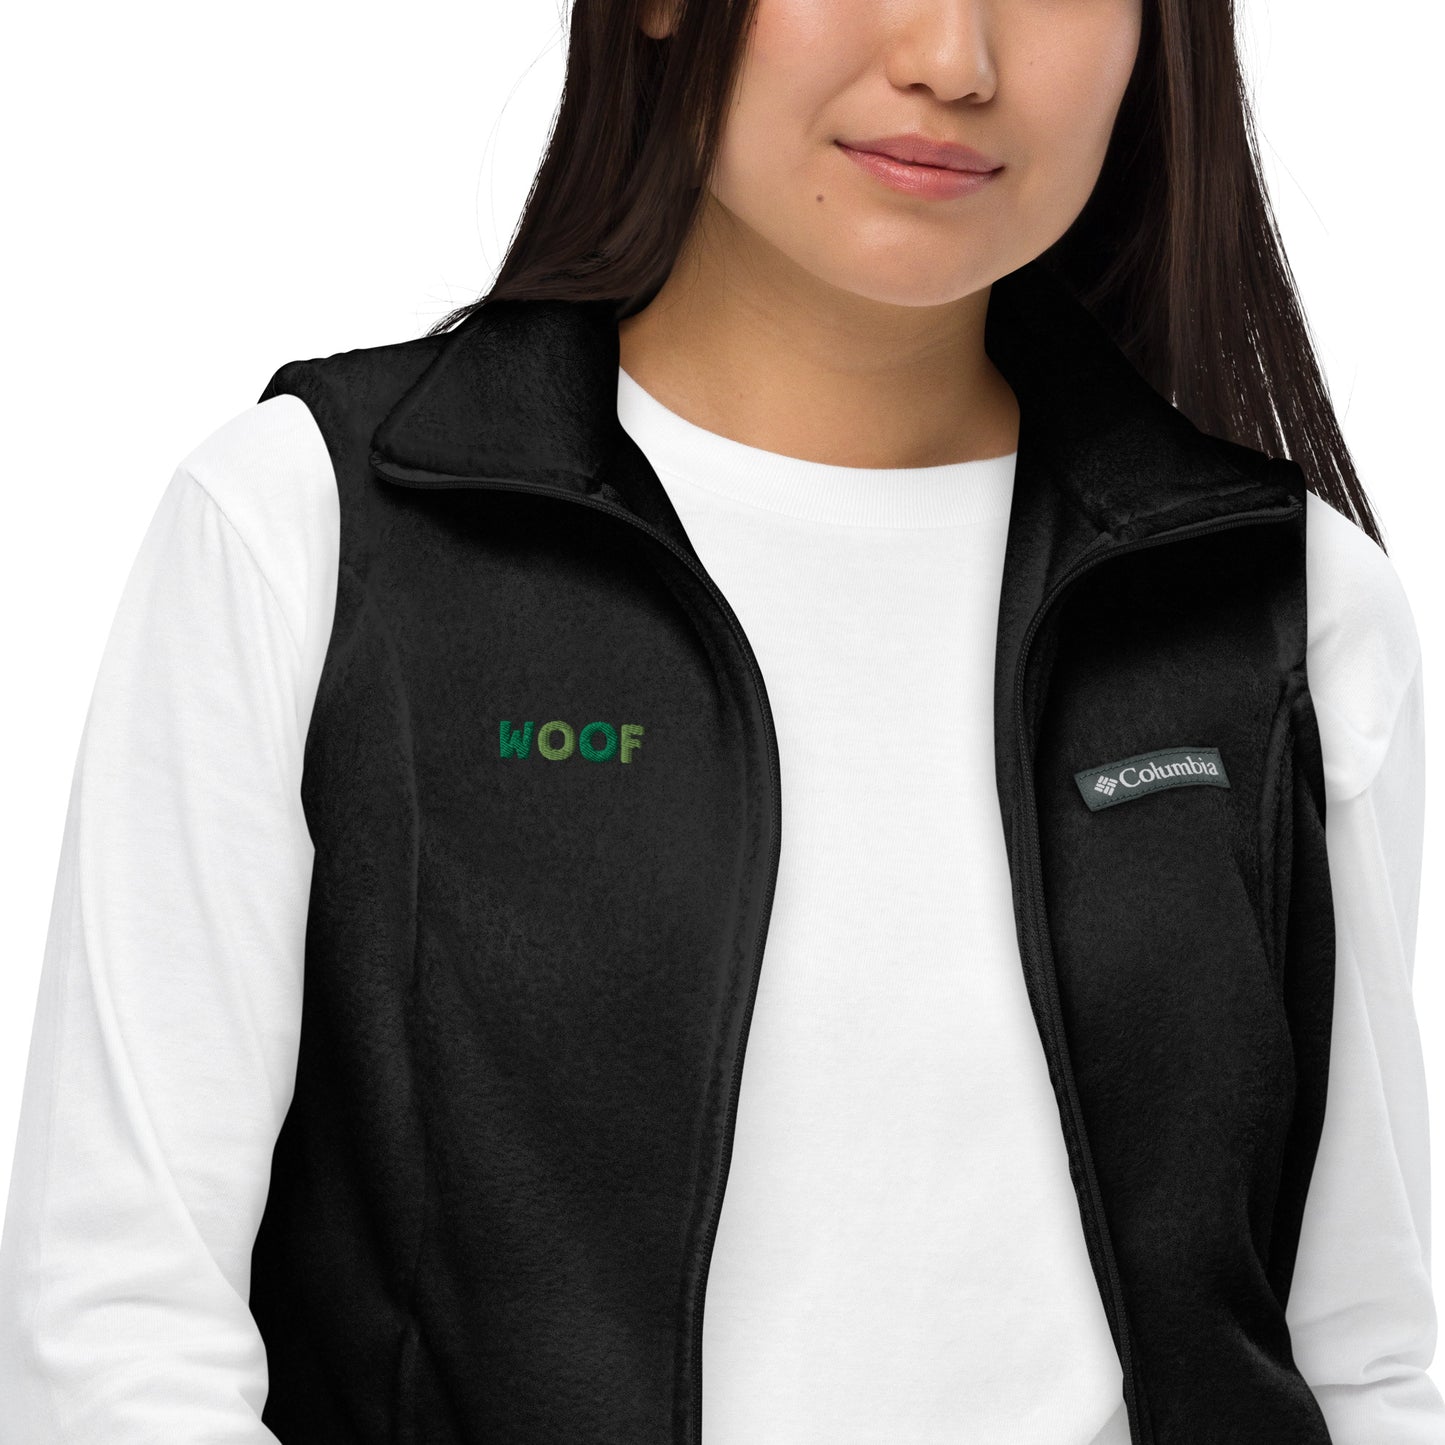 Women’s Columbia fleece Vest With Pocket Embroidery Woof for Dog Lover Mom